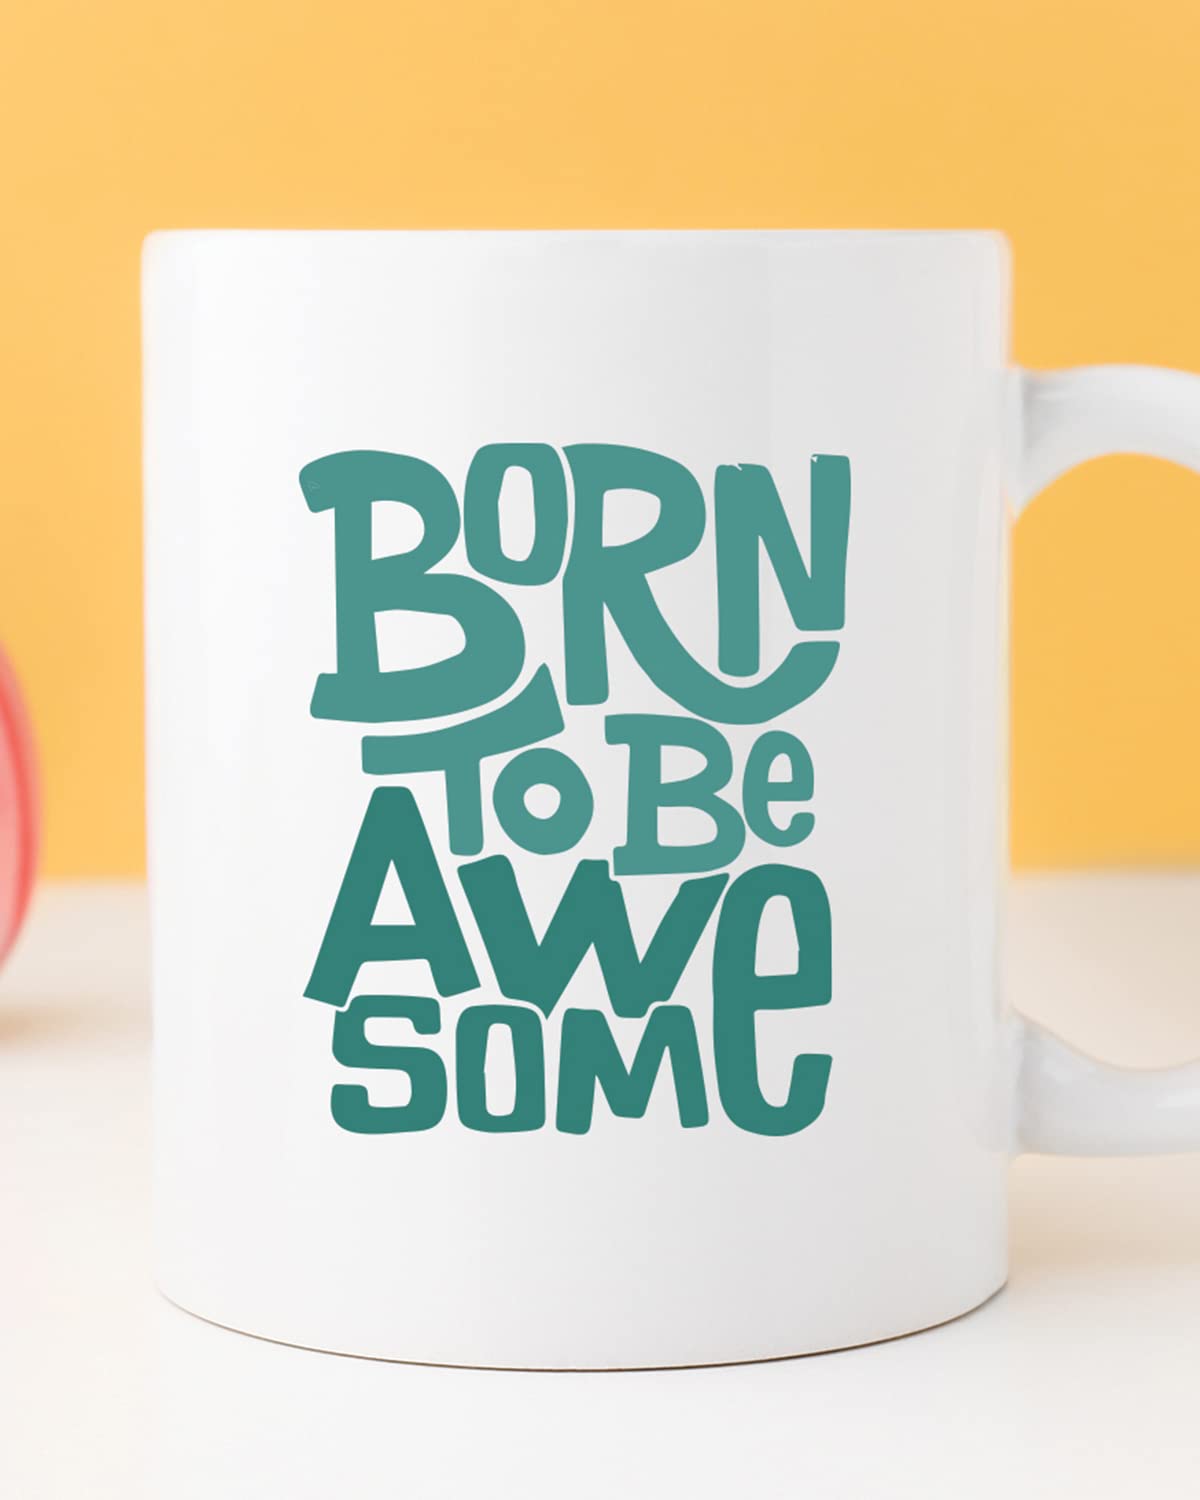 Born to BE Awesome Coffee Mug - Gift for Friend, Birthday Gift, Birthday Mug, Motivational Quotes Mug, Mugs with Funny & Funky Dialogues, Bollywood Mugs, Funny Mugs for Him & Her